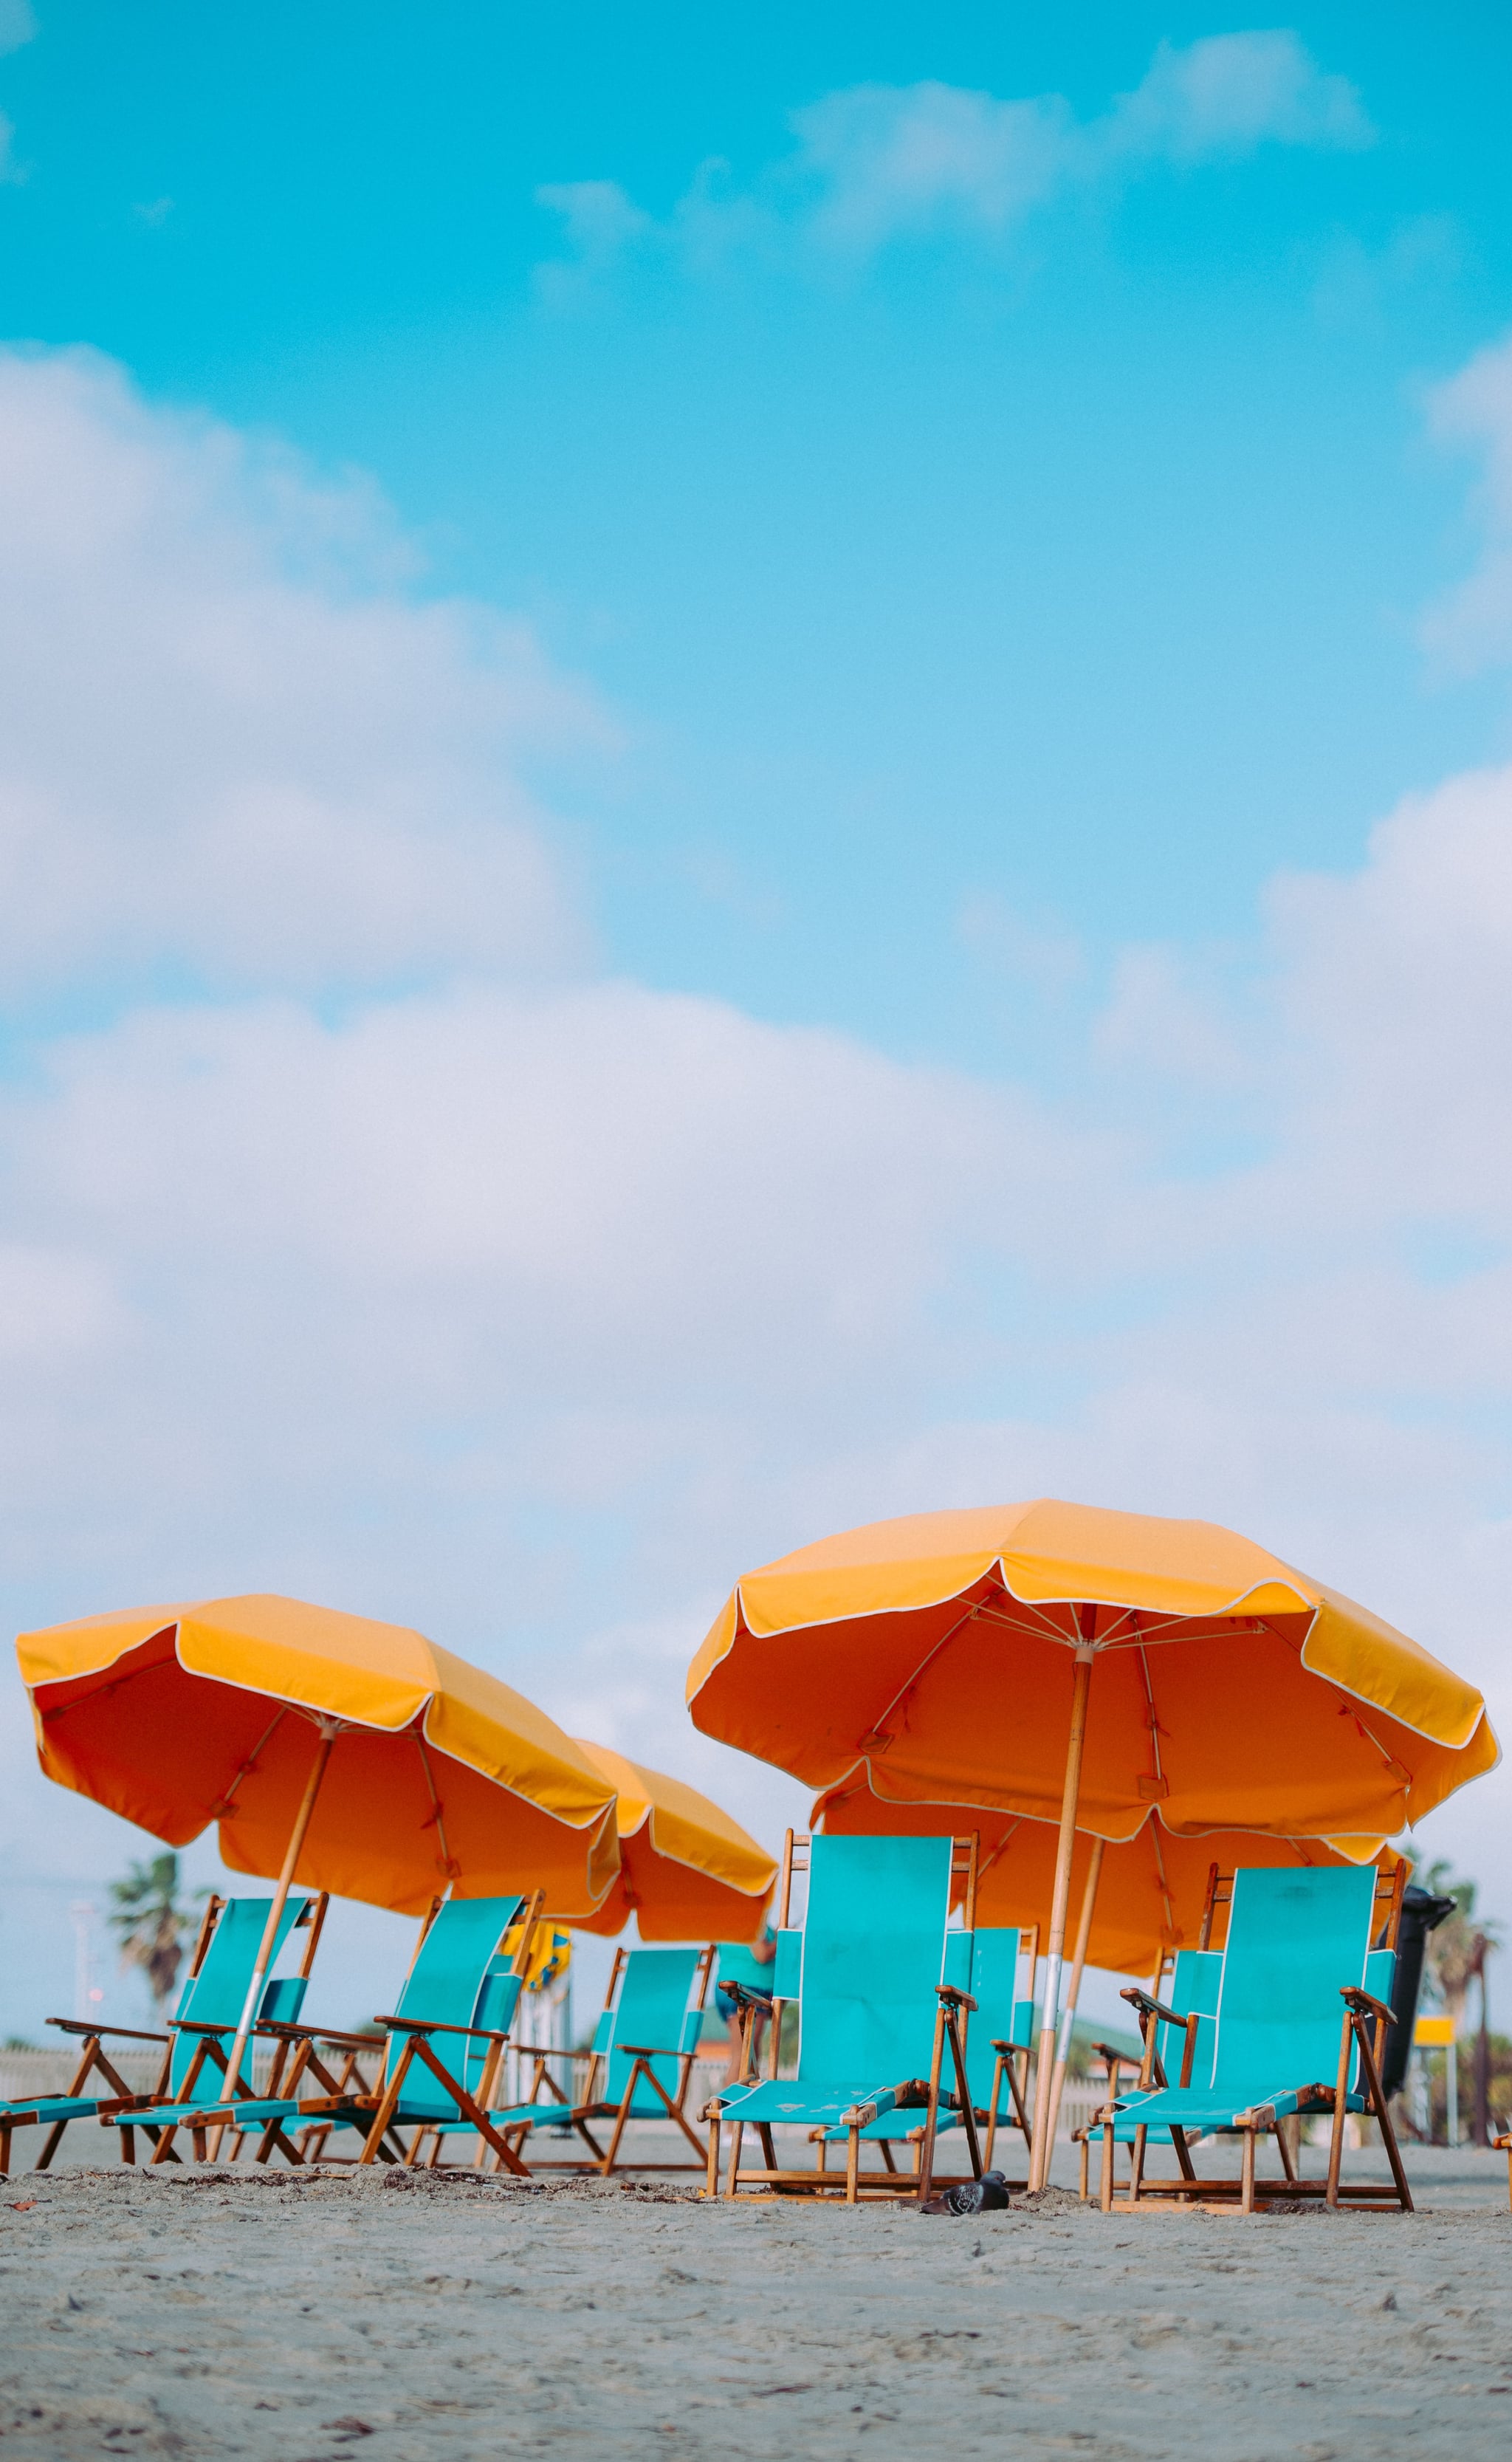 40 Beach iPhone Wallpapers Free to Download